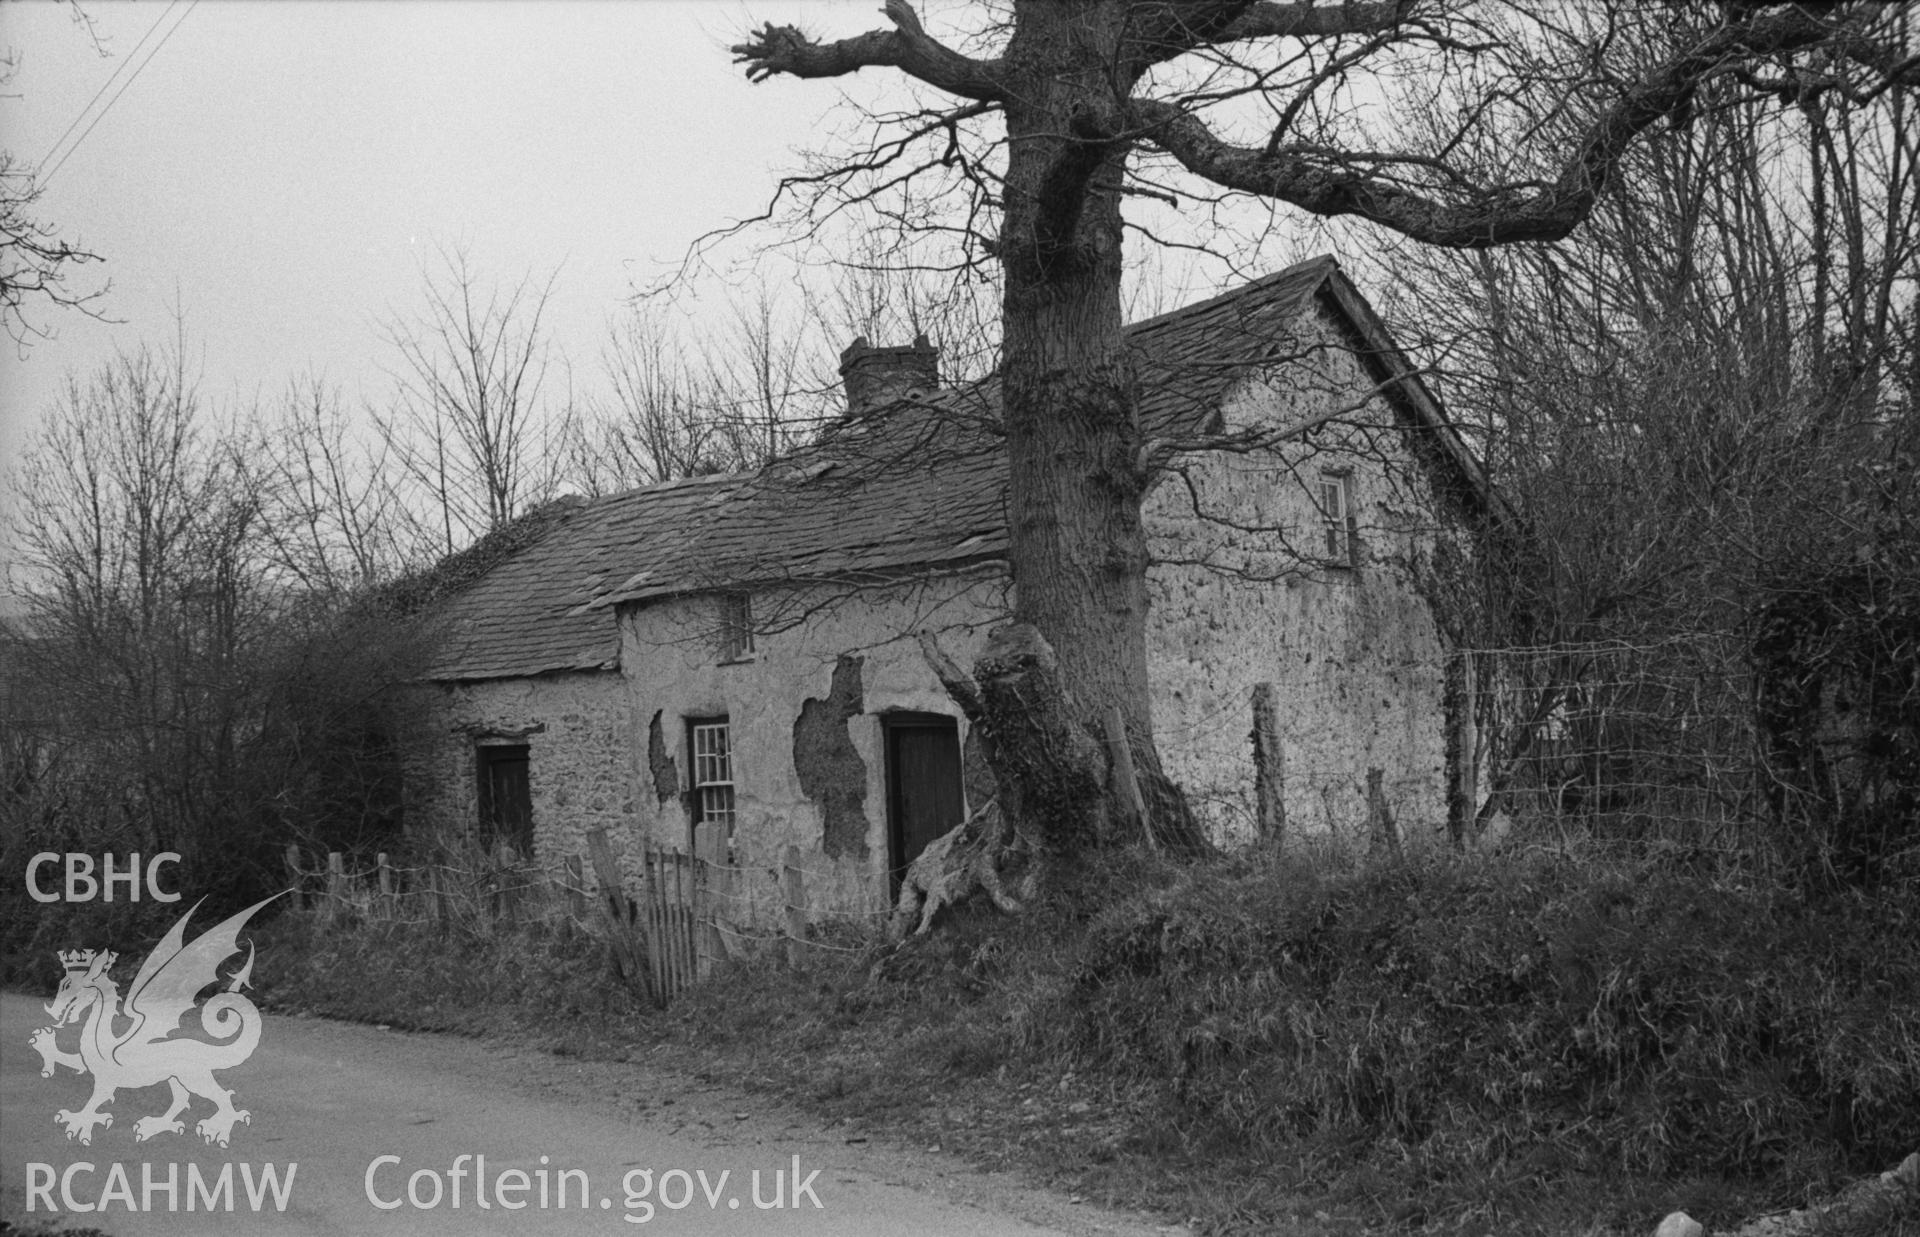 Black and White photograph showing a mud-walled cottage and oak tree at Castell Cynon on the road 1.3km west of the church near Llanfihangel-yr-Creuddyn. Photographed by Arthur Chater in April 1962 from Grid Reference SN 653 761, looking north west.